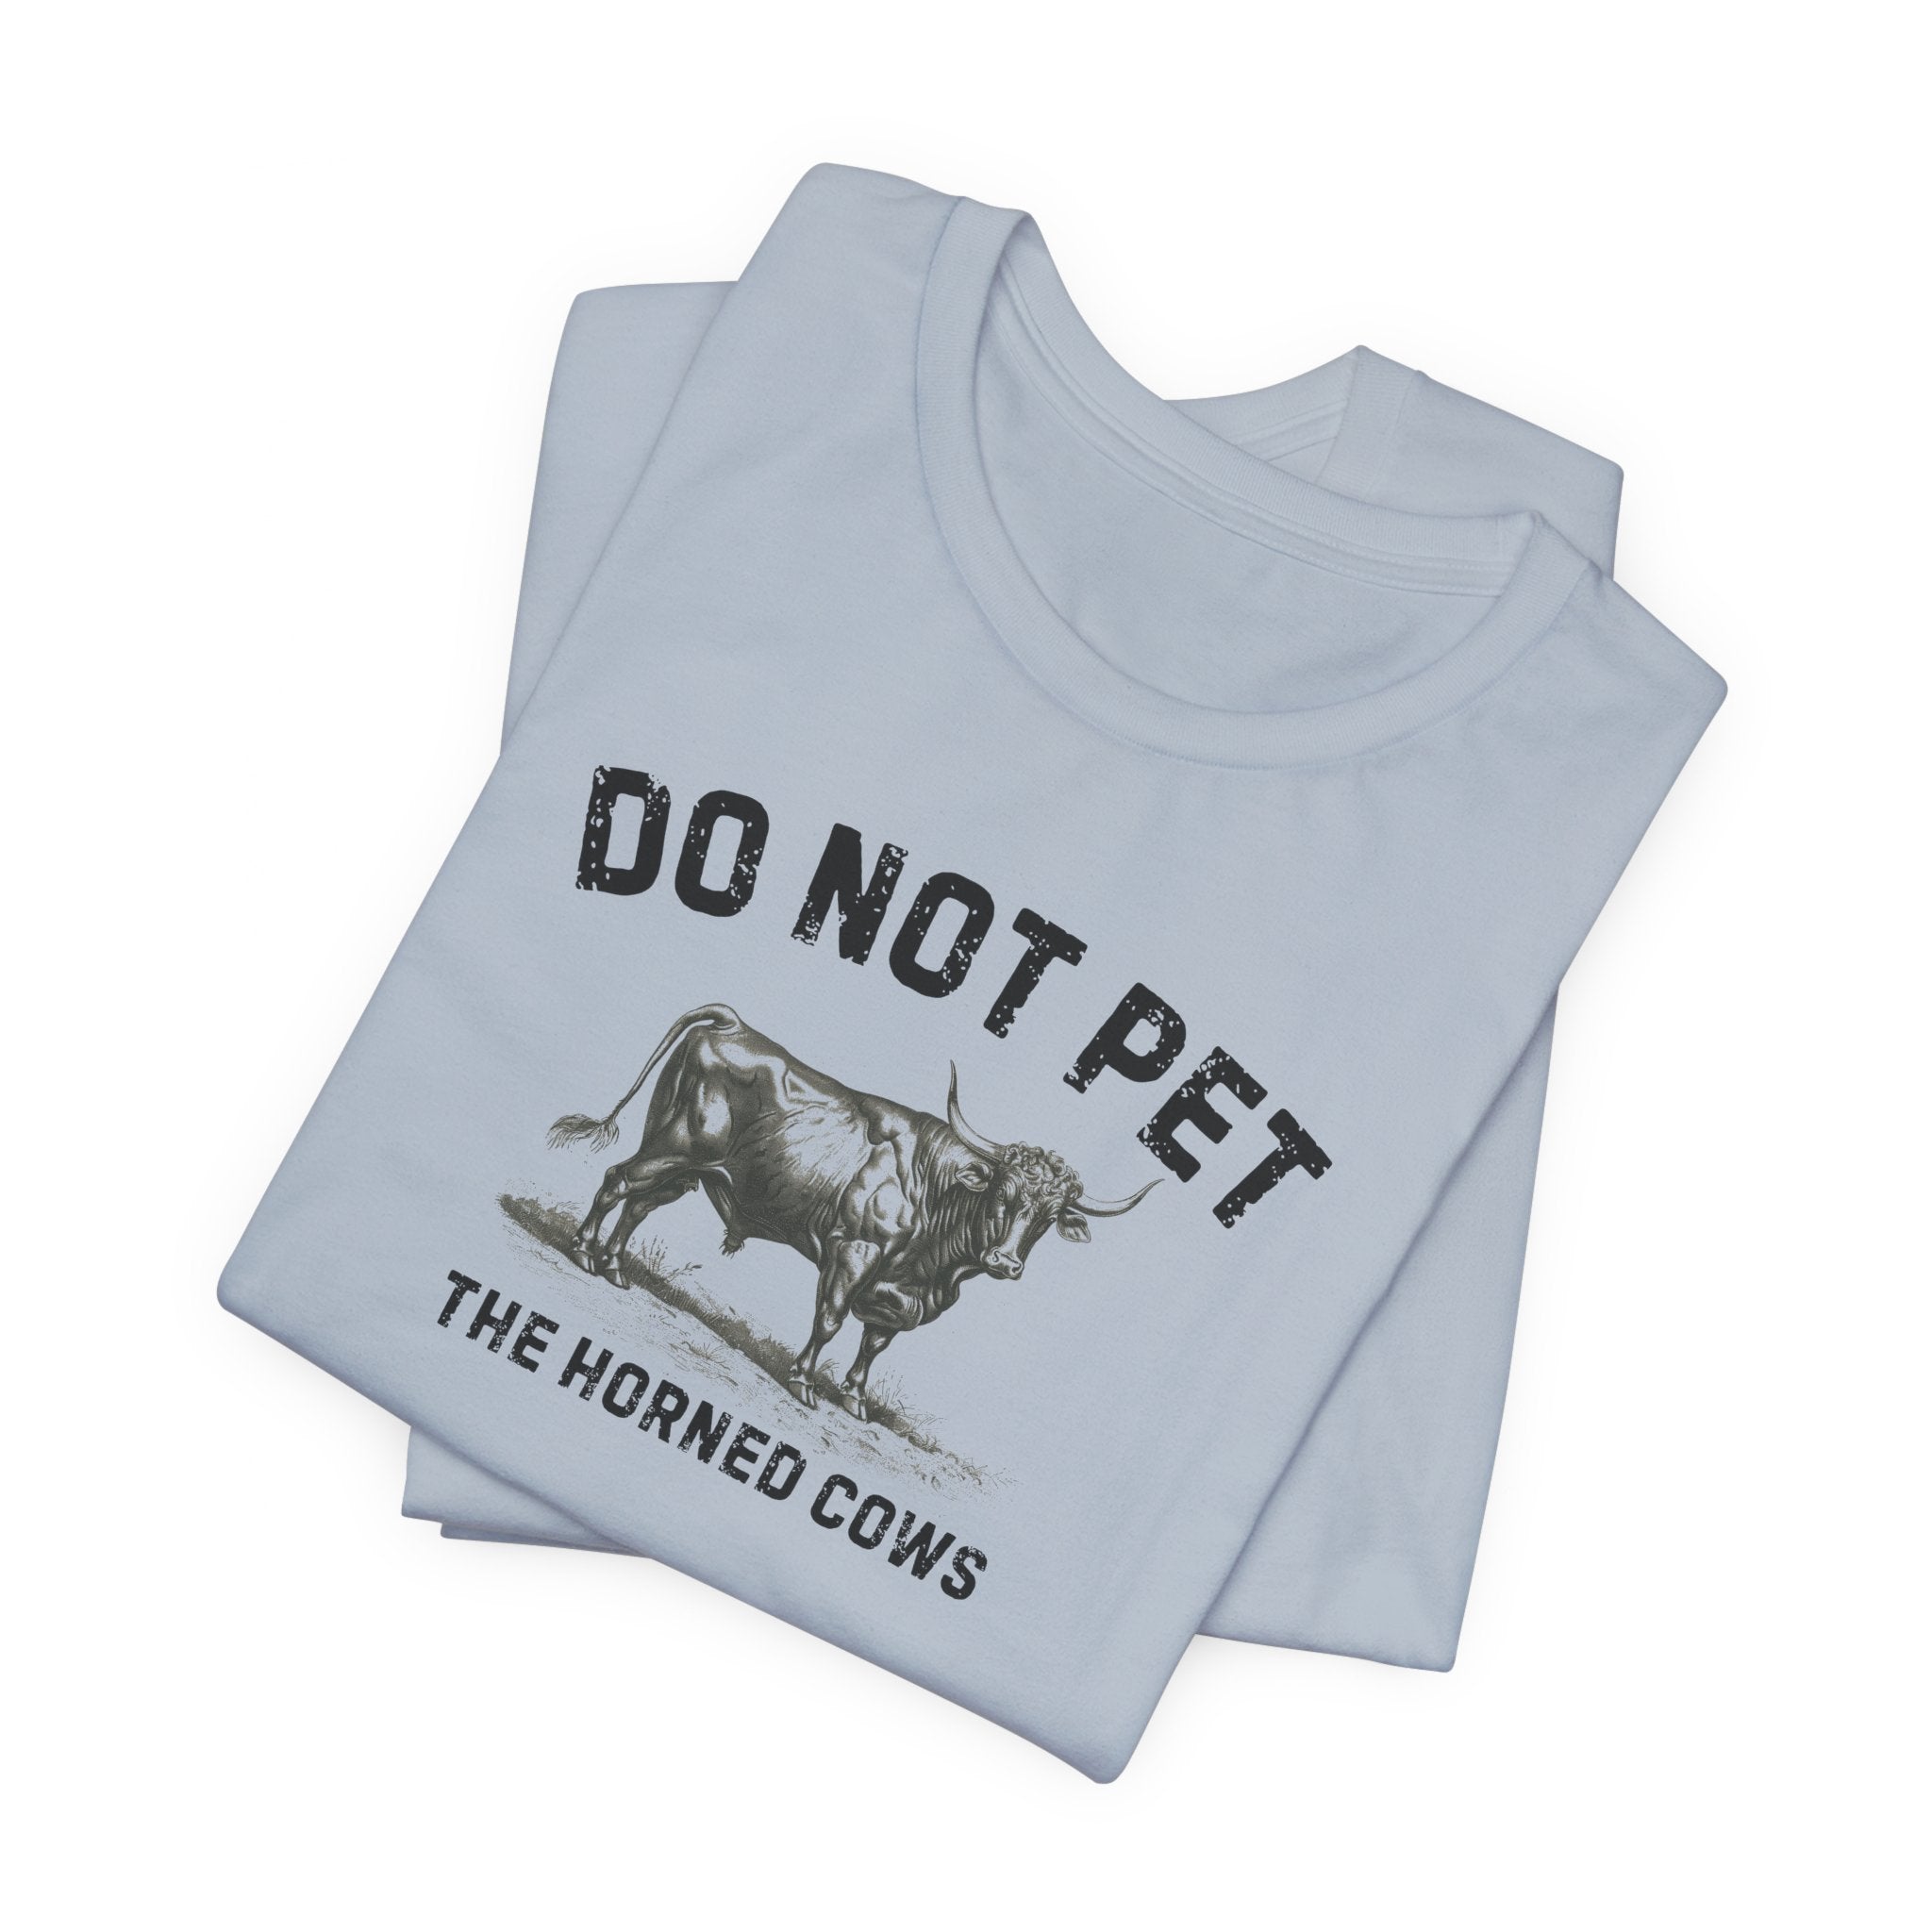 Do Not Pet The Horned Cows Shirt Funny Bull Lover Tee